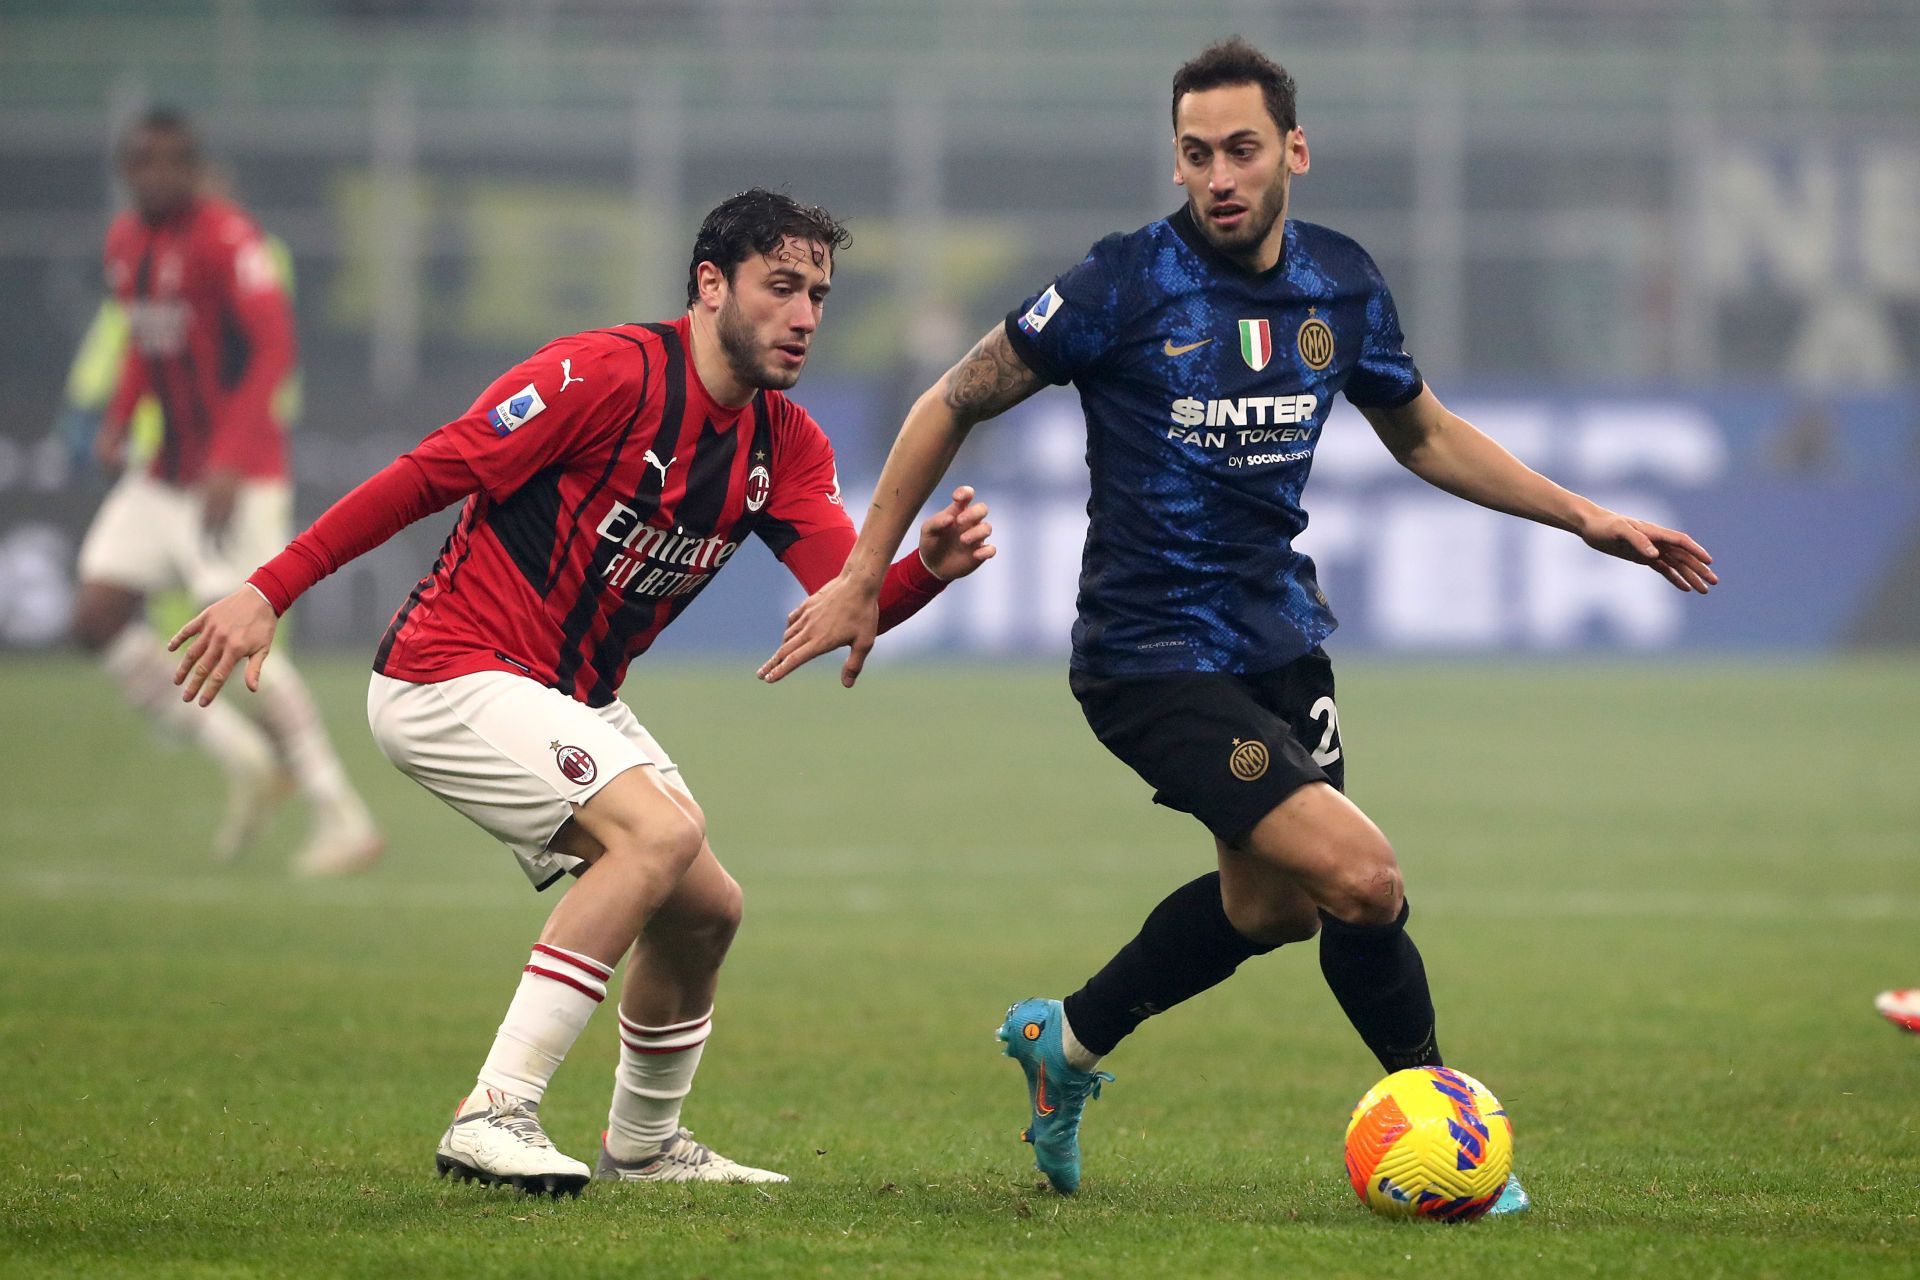 Inter Milan have lost just two games in the Serie A this season FC Internazionale v AC Milan - Serie A